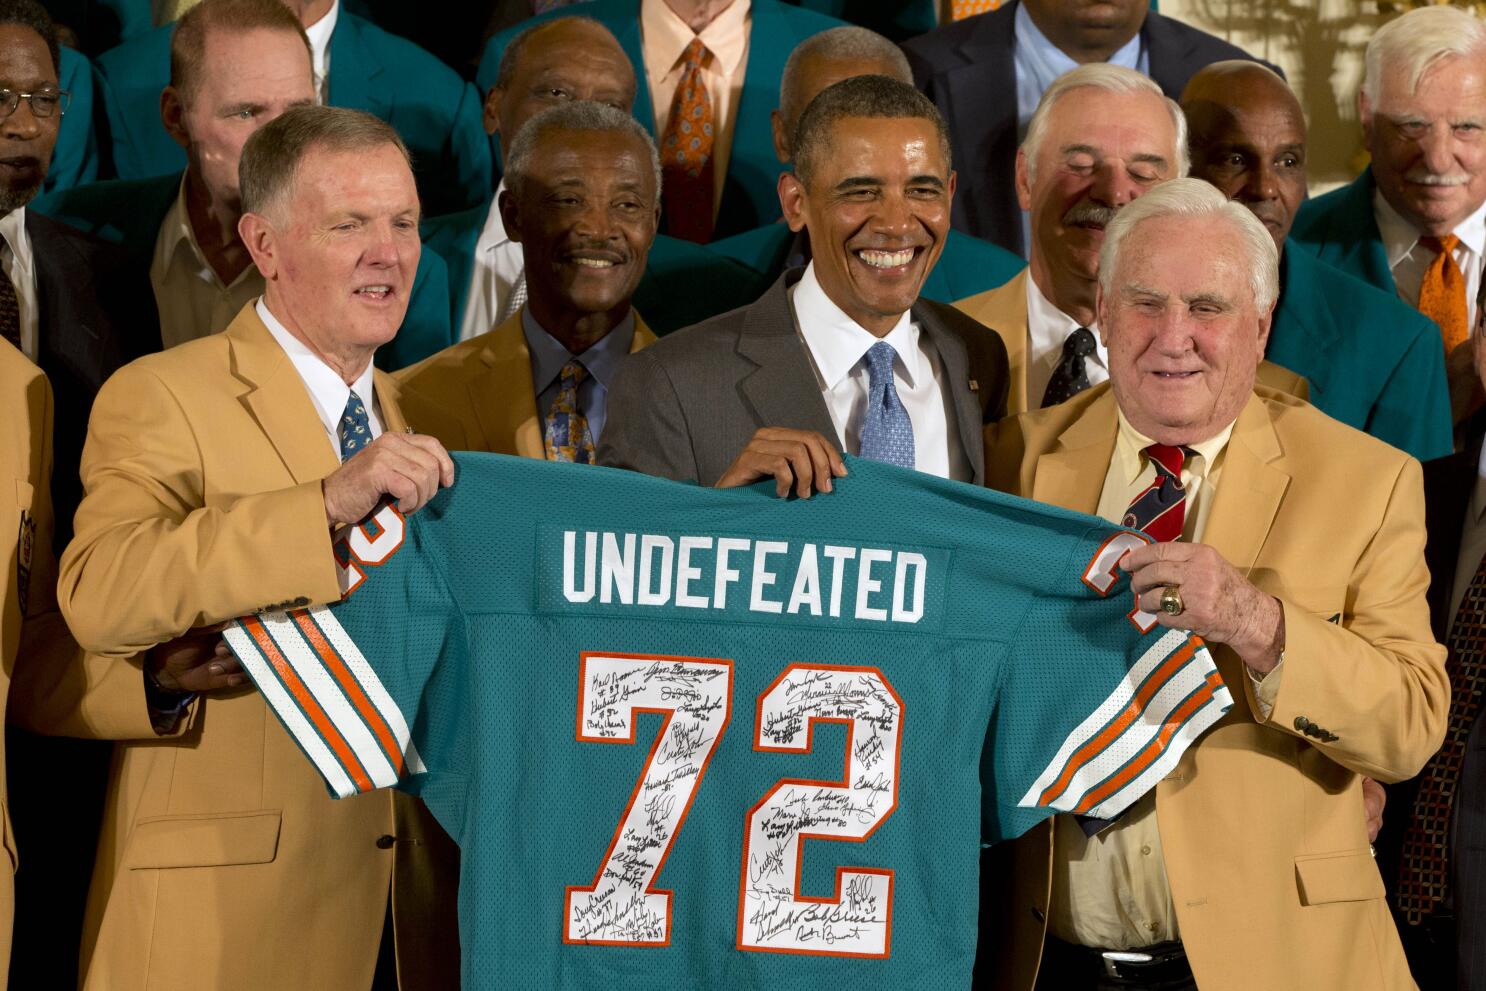 undefeated dolphins